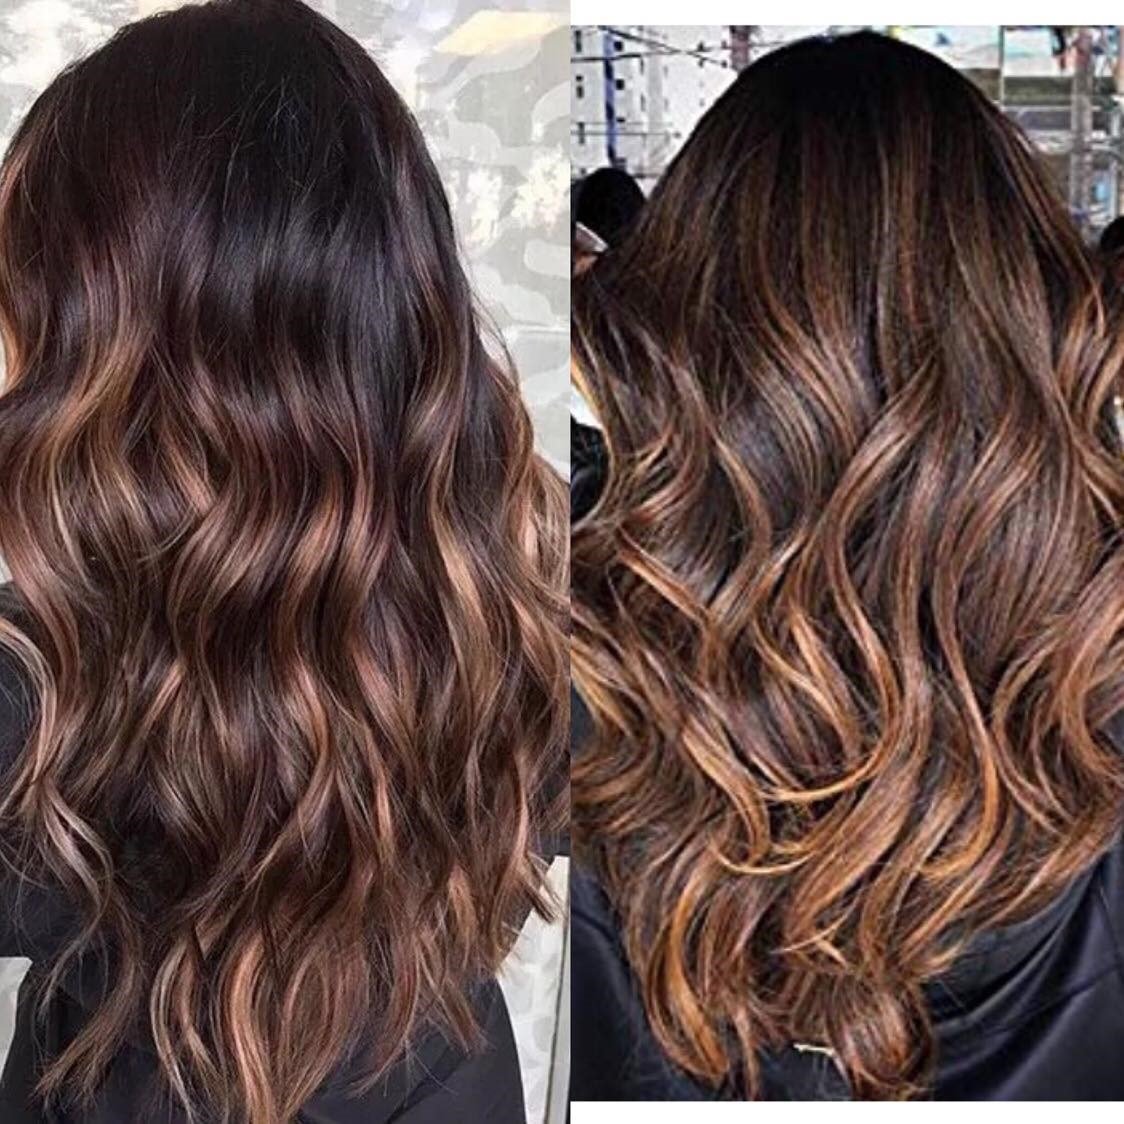 Ombre Balayage Hairstyle Ideas For Long Hair In 2019